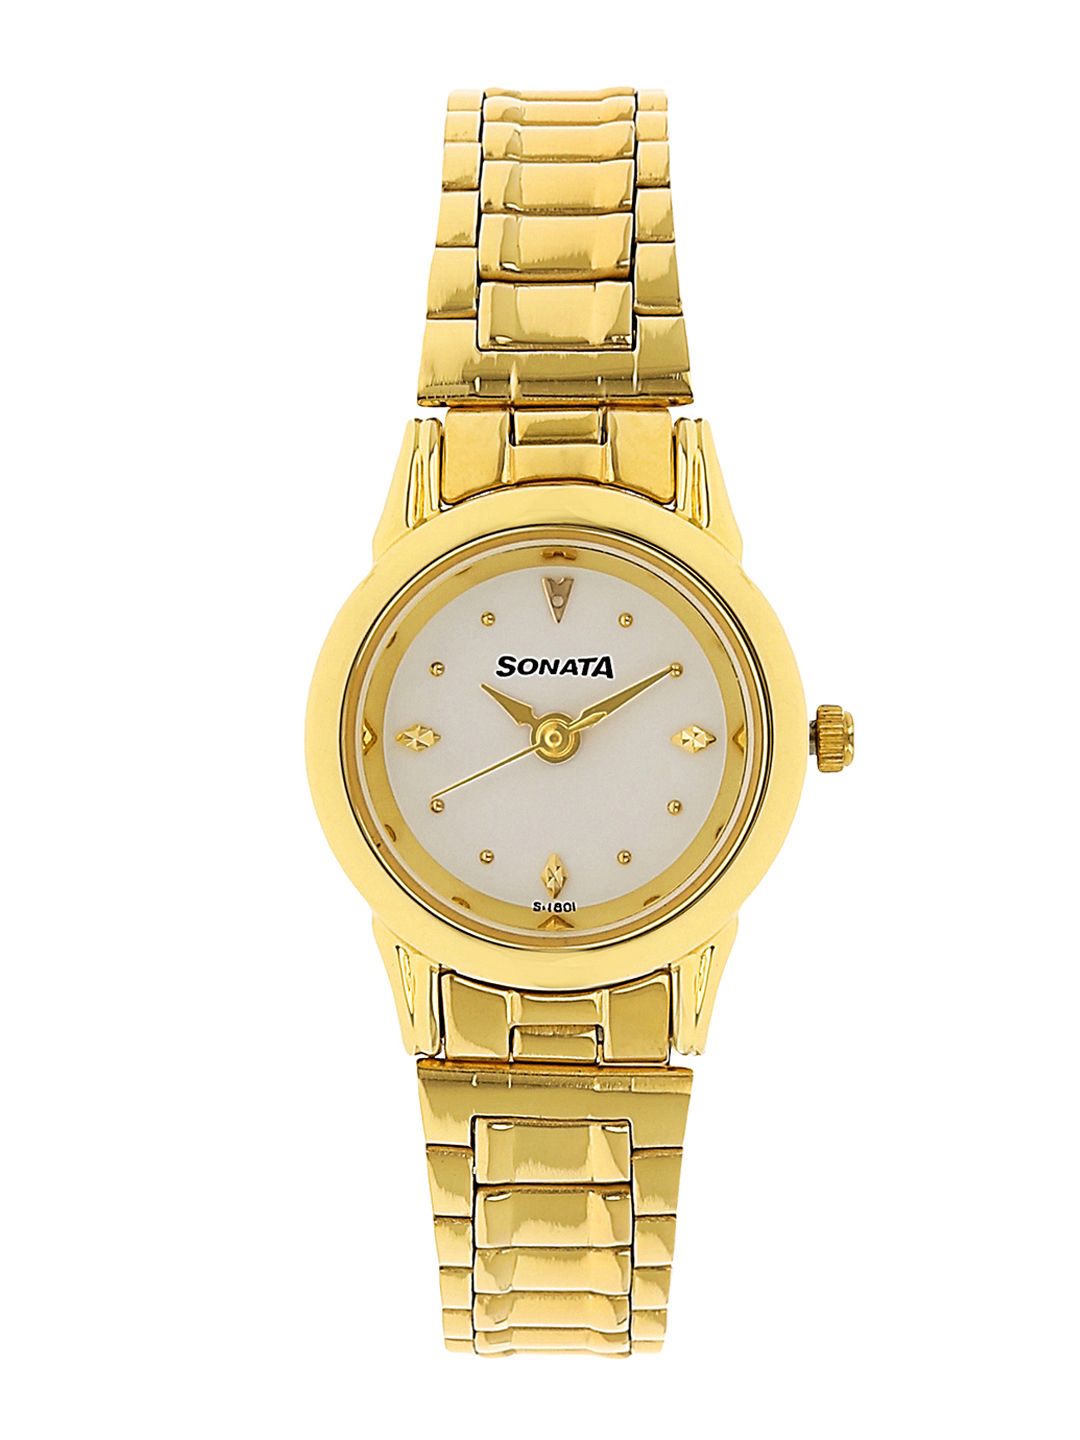 Sonata Women Gold-Toned Analogue Watch Price in India